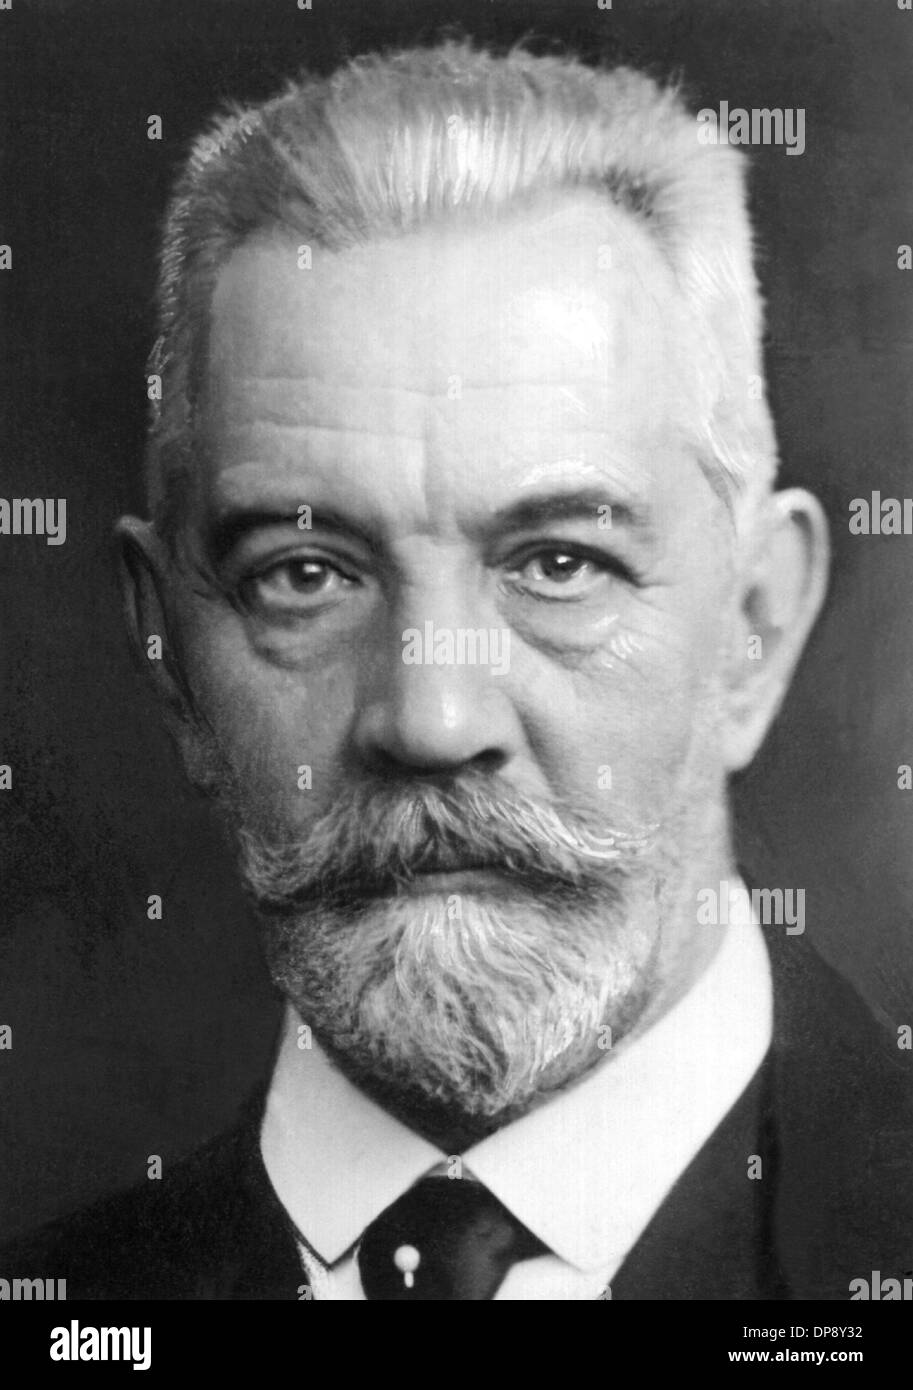 Politician Theobald von Bethmann-Hollweg in a contemporary picture. He became imperial chancellor in 1909 and Prussian minister president. He had already aimed for a peace resolution in November 1914. After Ludendorff and Hindenburg had taken over the Supreme Army Command in 1916, he lost rapidly lost political power. He was born on the 29th of November in 1856 in Hohenfinow near Eberswalde and died there on the 2nd of January in 1921. Stock Photo